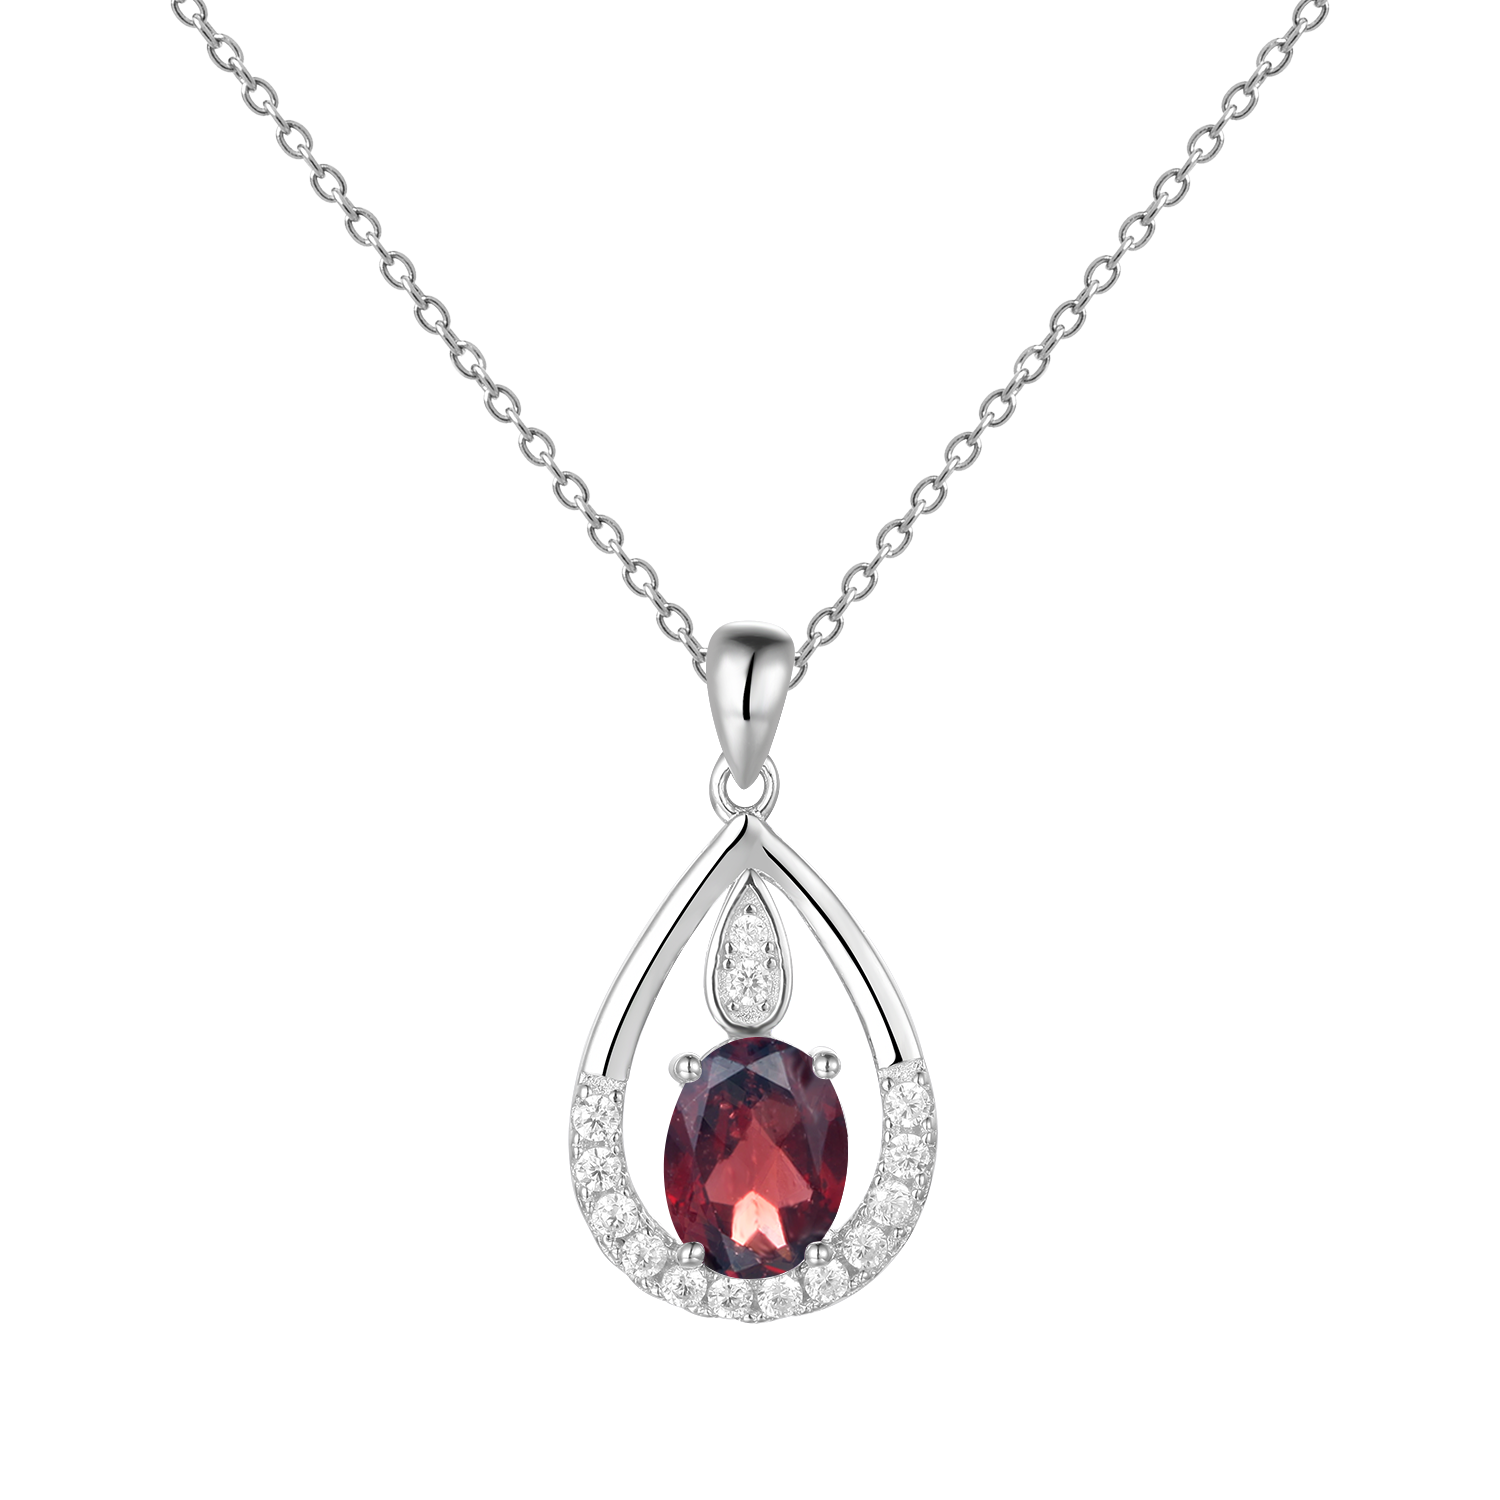 Gem&#39;s Ballet December Birthstone Topaz Necklace 6x8mm Oval Pink Topaz Pendant Necklace in 925 Sterling Silver with 18&quot; Chain Garnet